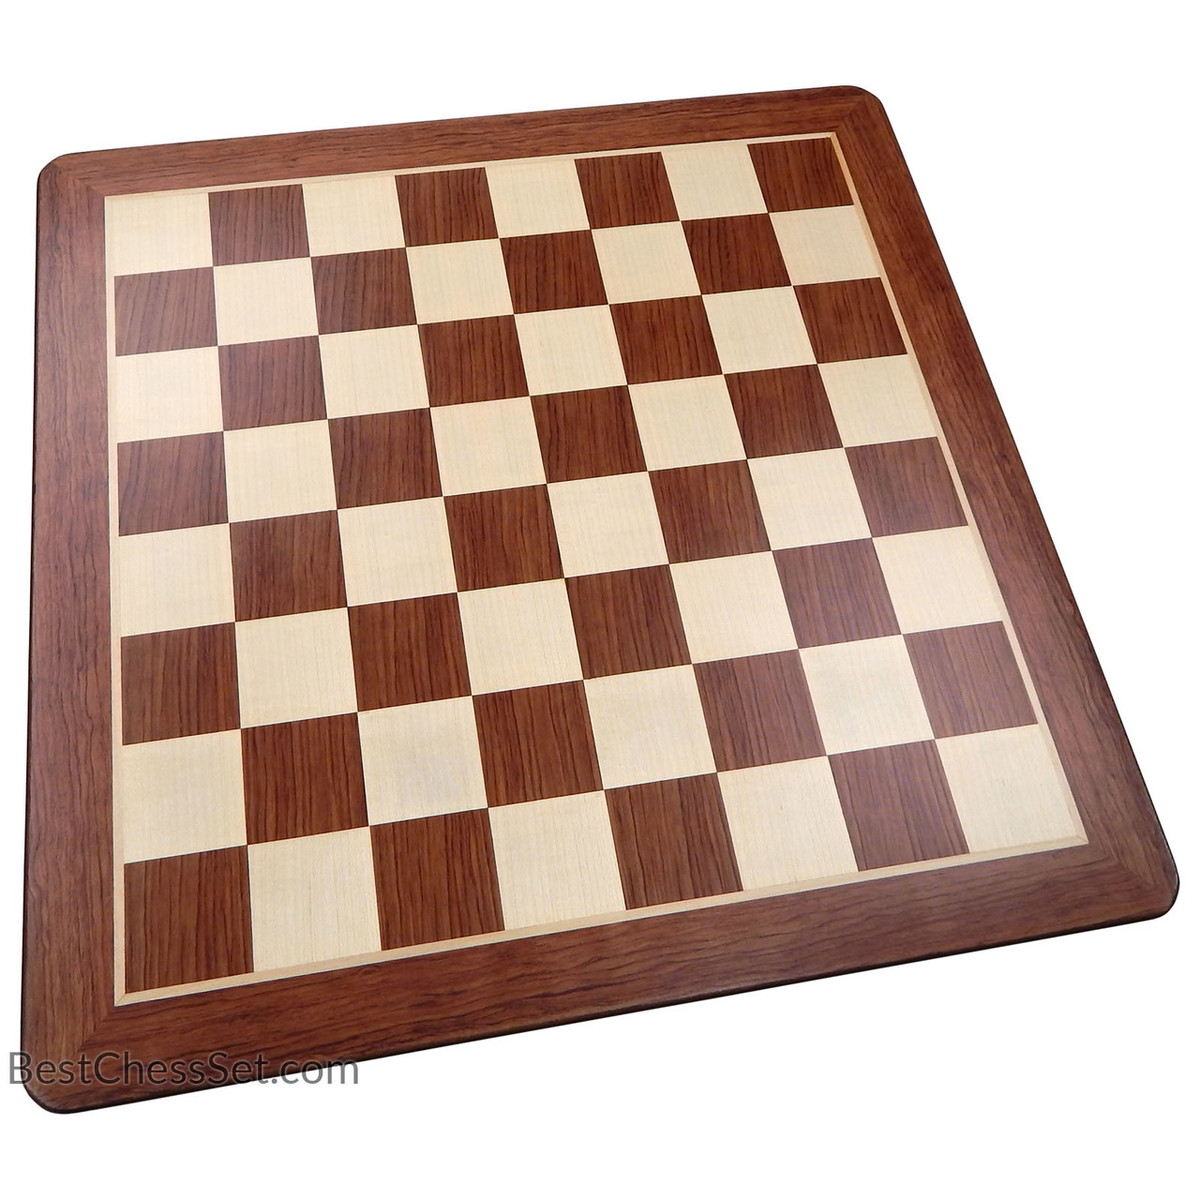 LARGE 19" WOODEN CHESS BOARD NATURAL MAPLE & WALNUT WOOD NEW 